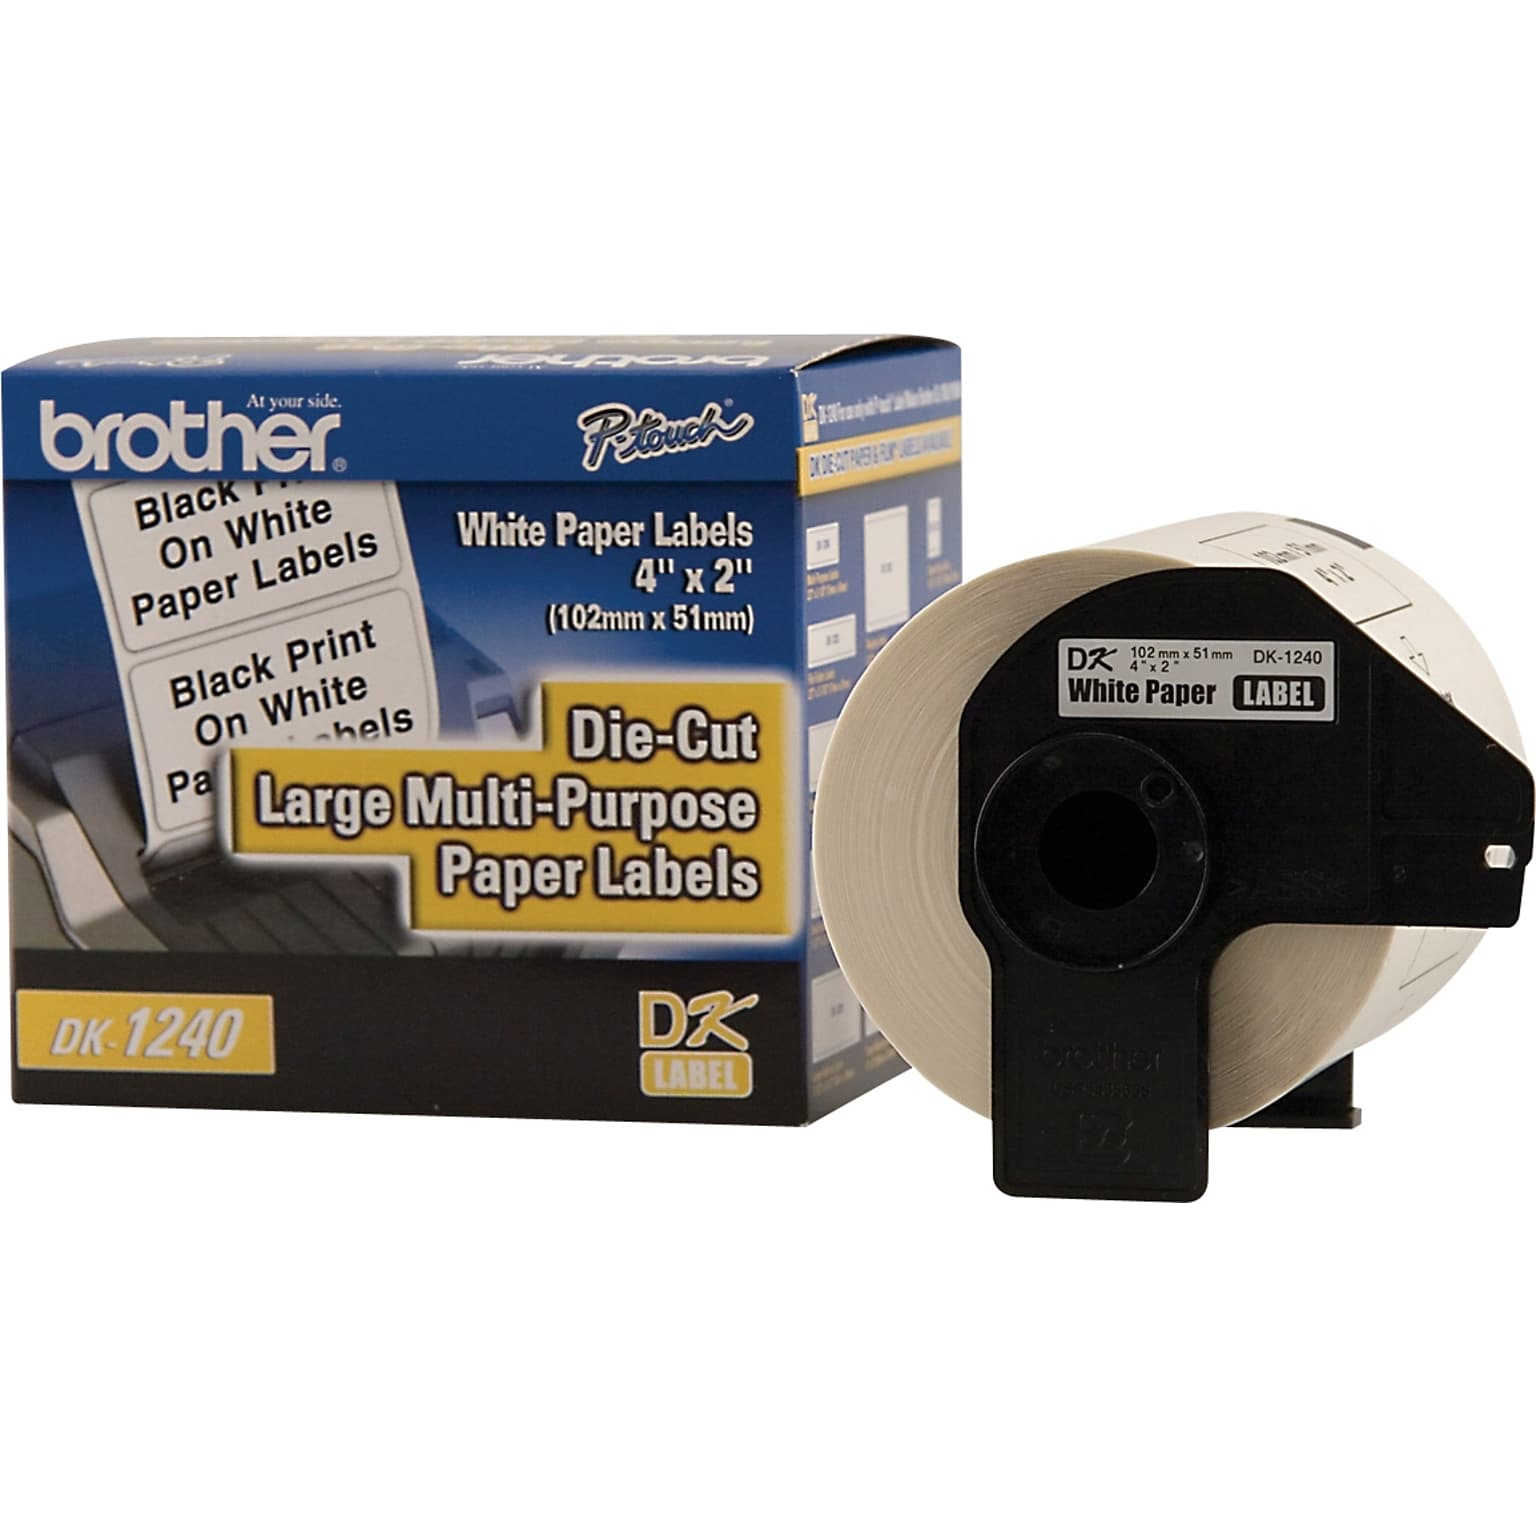 Brother DK-1240 Large Multi-Purpose Paper Labels, 4 x 1-9/10, Black on White, 600 Labels/Roll (DK-1240)